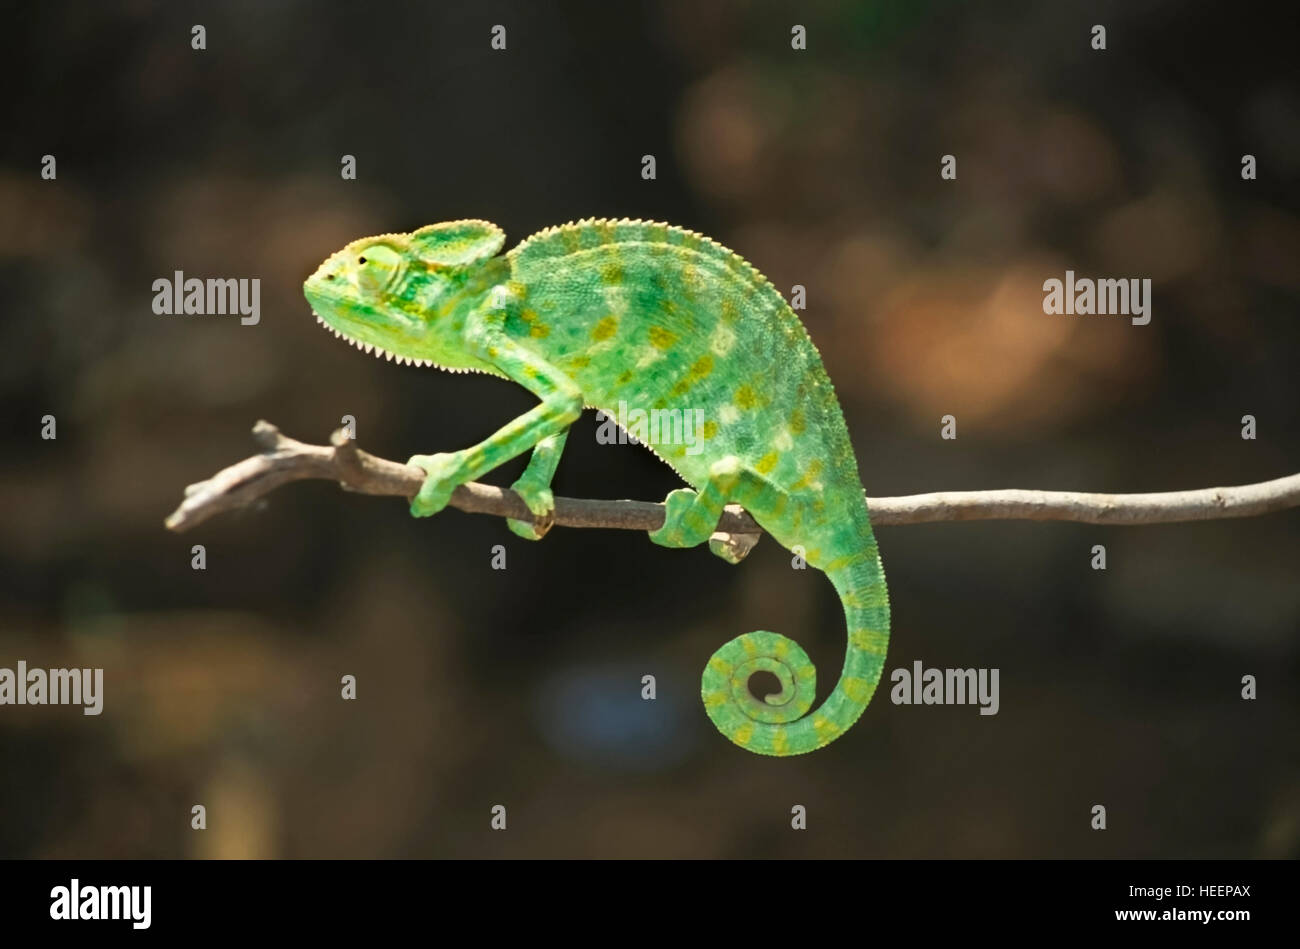 South Asian Chameleon, Chamaeleo zeylanicus, The only species found in India Stock Photo